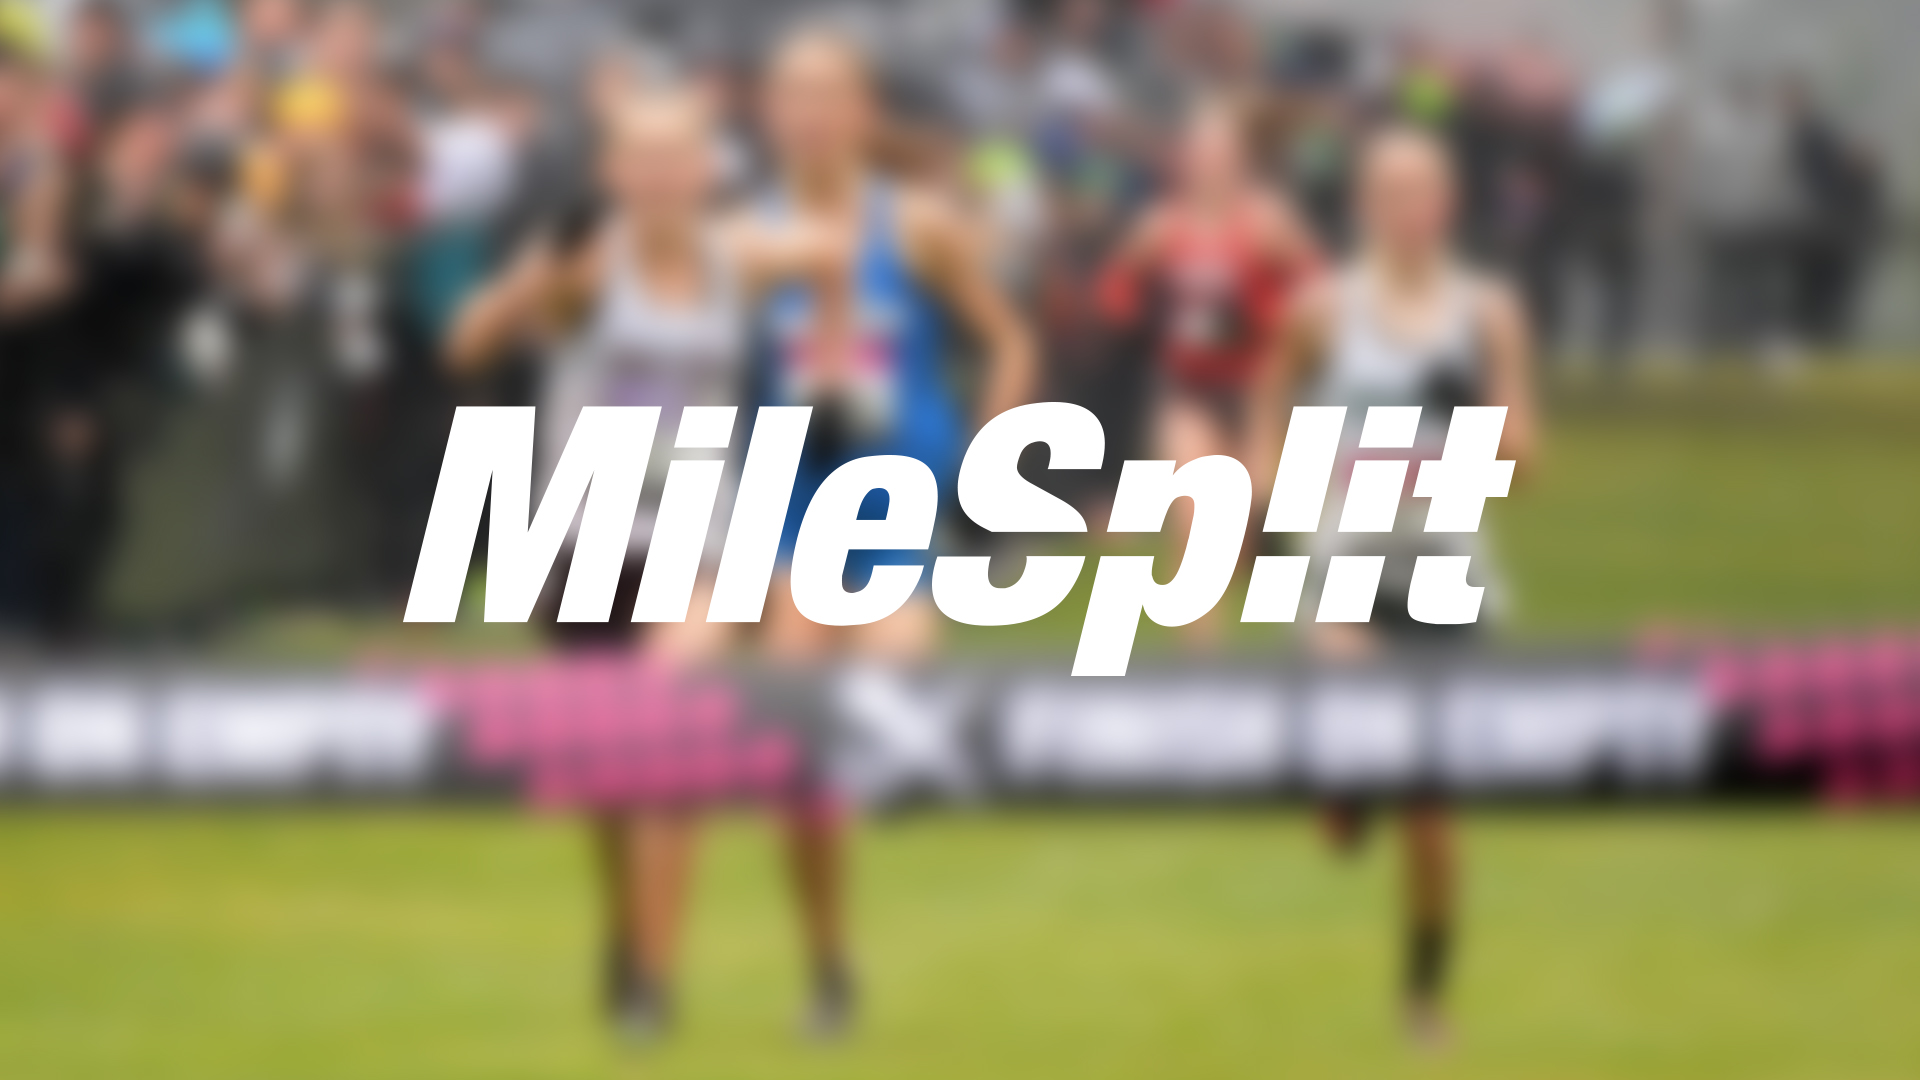 Log in now to check out exclusive Milesplit content! Milesplit